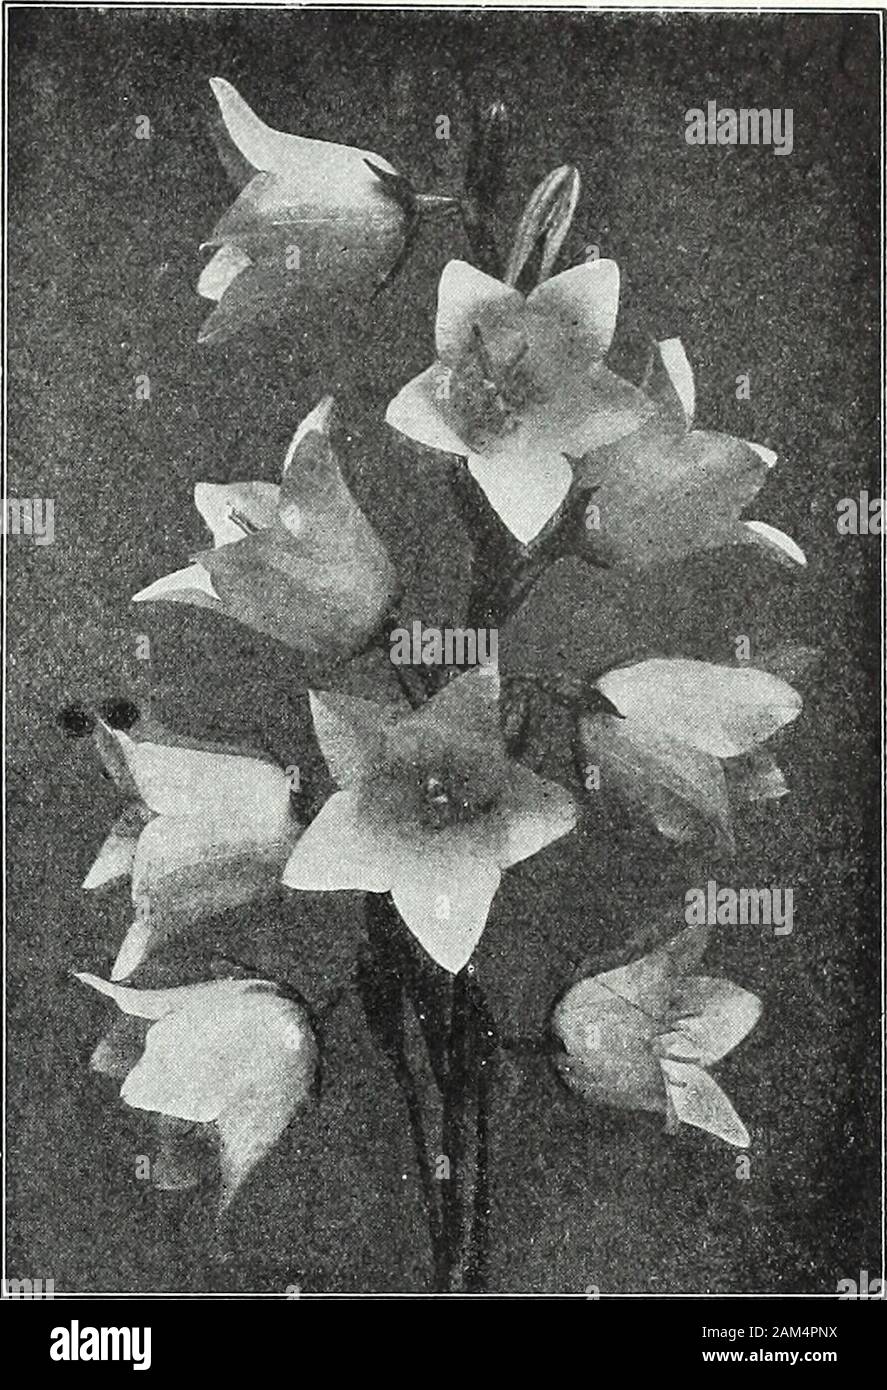 Farquhar's garden annual : 1922 . owing plantproducing spikes of pea-shaped blue flowers six inches in length.June and July. 2j ft. ... ... ... j oz., .75; BOCCONIA japonica. (Plume Poppy, or Tree Celandine.) Anoble hardy perennial, with large glaucous leaves and tallflower stems with terminal panicles of white flowers. Usefulfor planting as a background in large beds. July and Aug.6 to 8 ft ^oz., .50; BOLTONIA asteroides. One of the showiest of our nativeperennials closely resembUng and allied to the hardy Asters;flowers pure white. Aug. and Sept. 6 ft. ... latisquama. Flowers pink, slightly Stock Photo